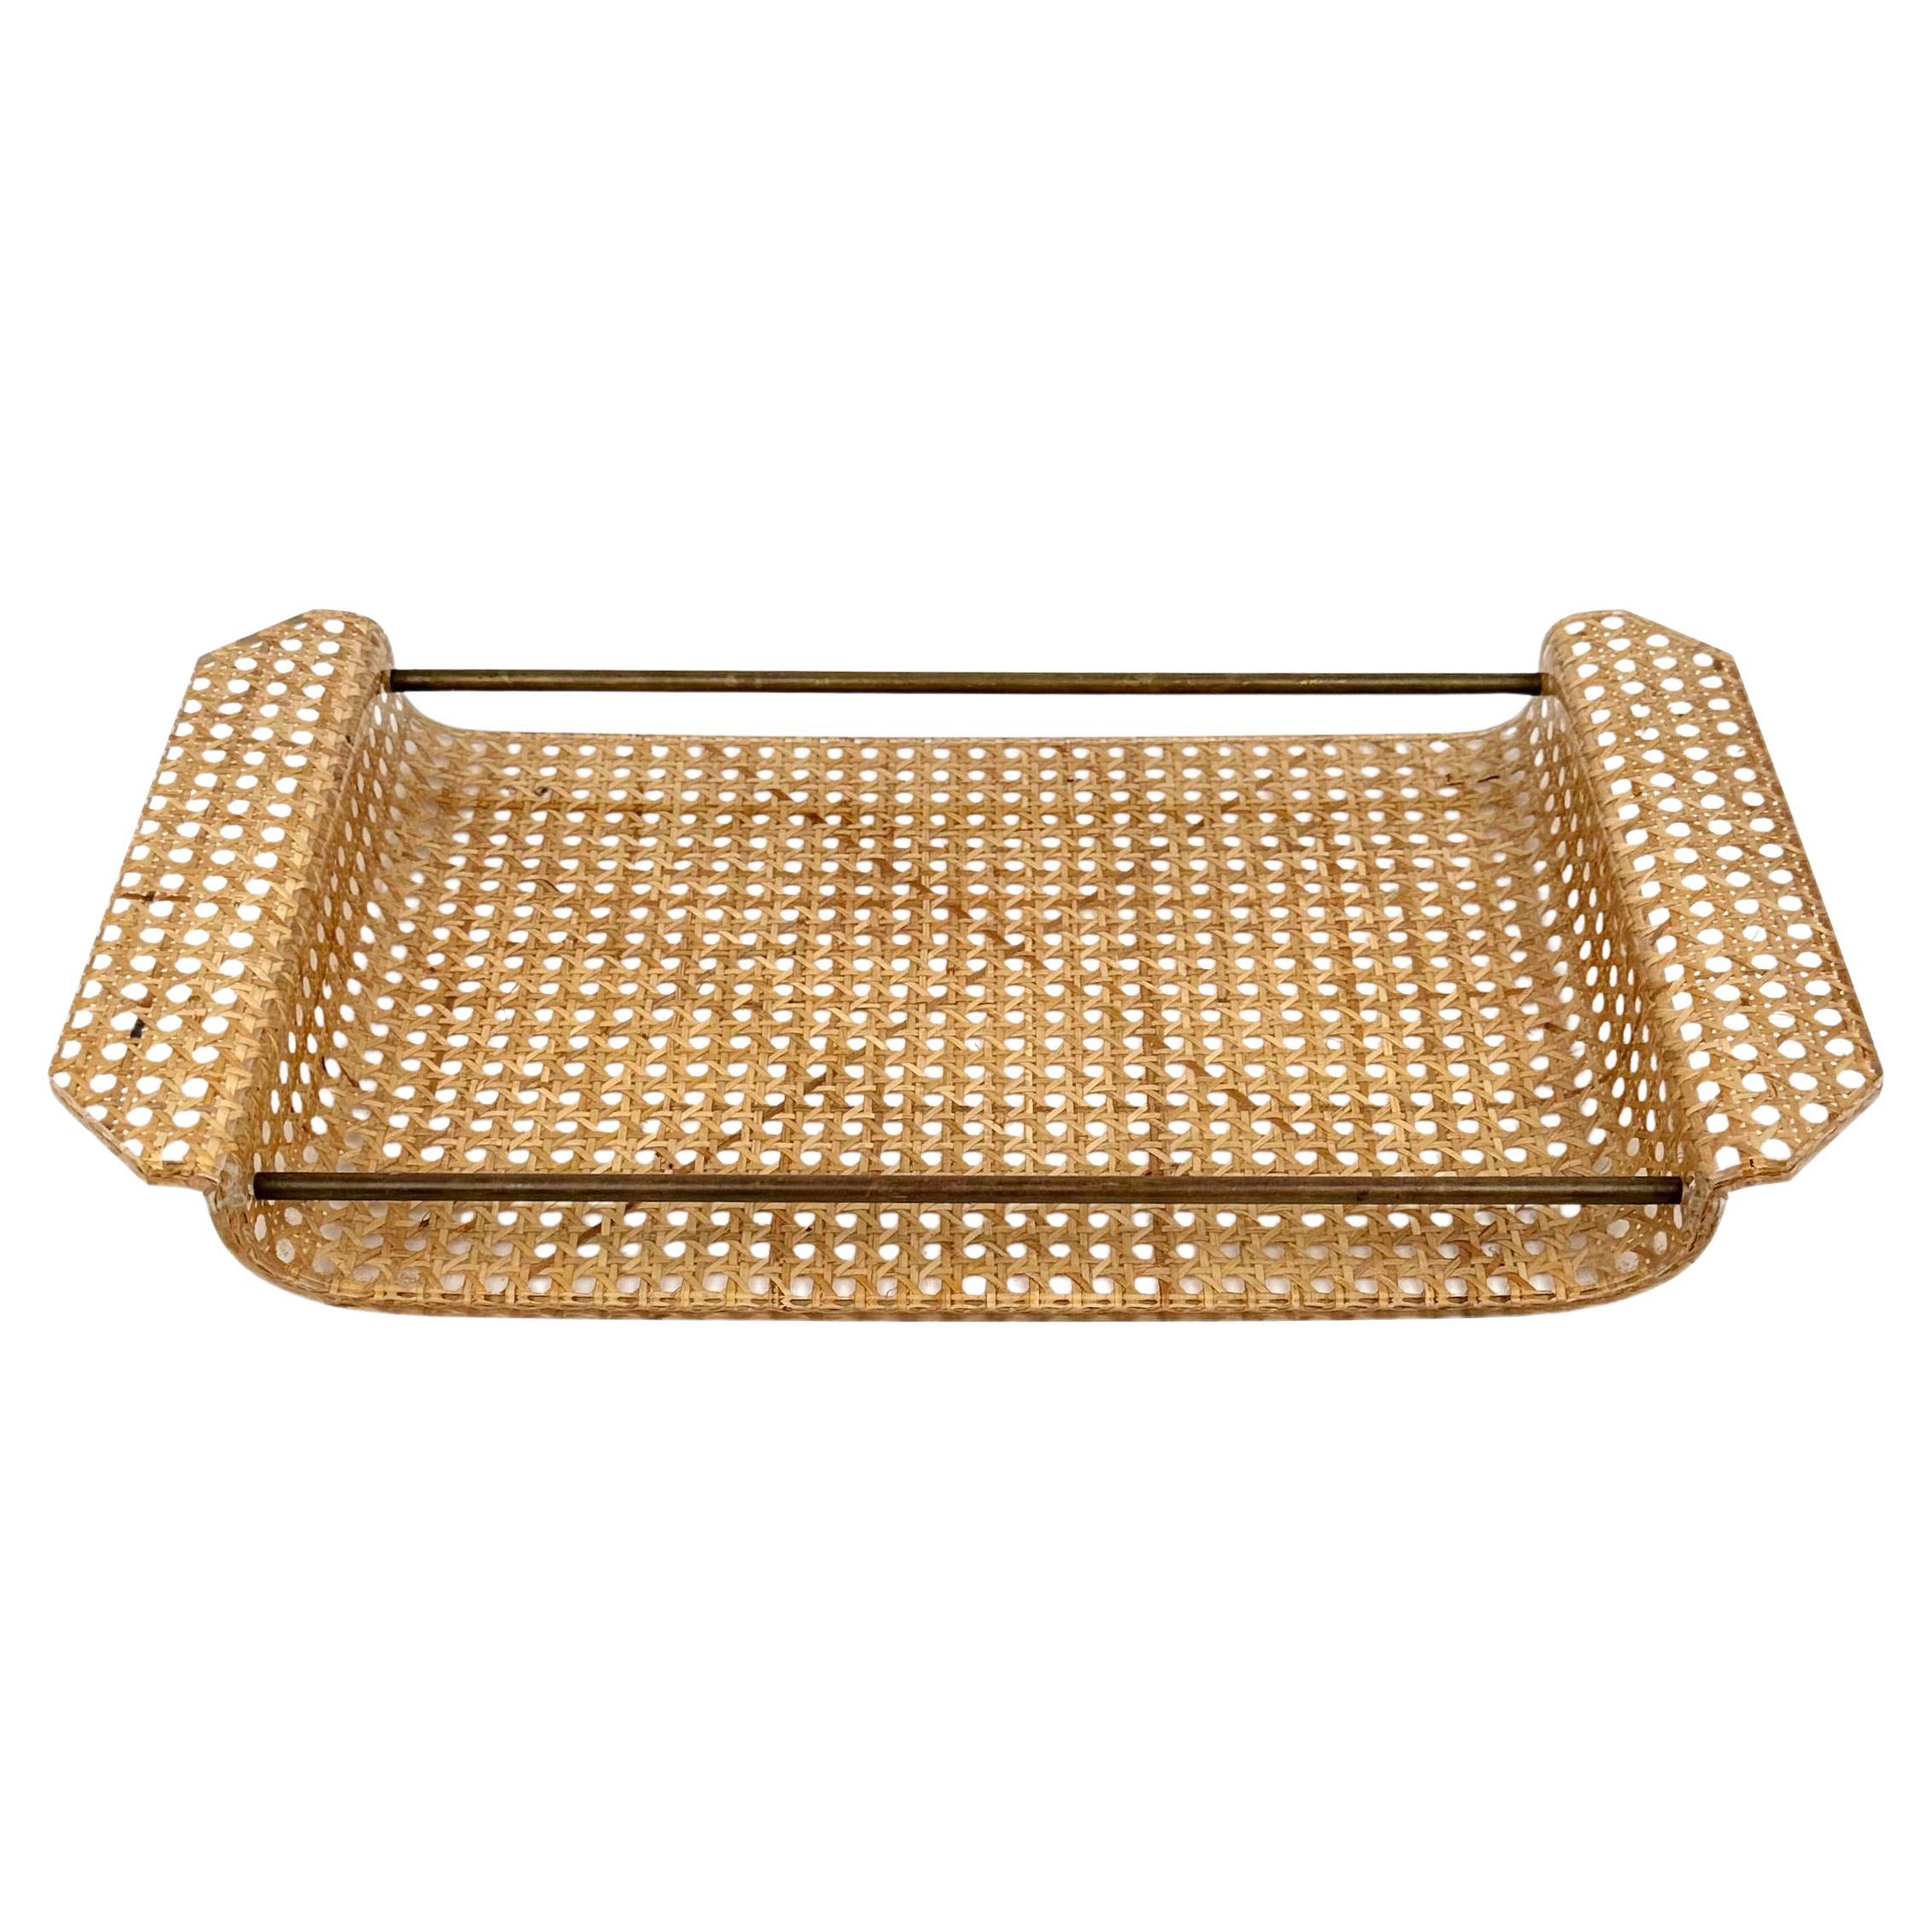 Midcentury rectangular serving tray in lucite, rattan and brass detail in the style of Christian Dior.

Made in Italy in the 1970s.